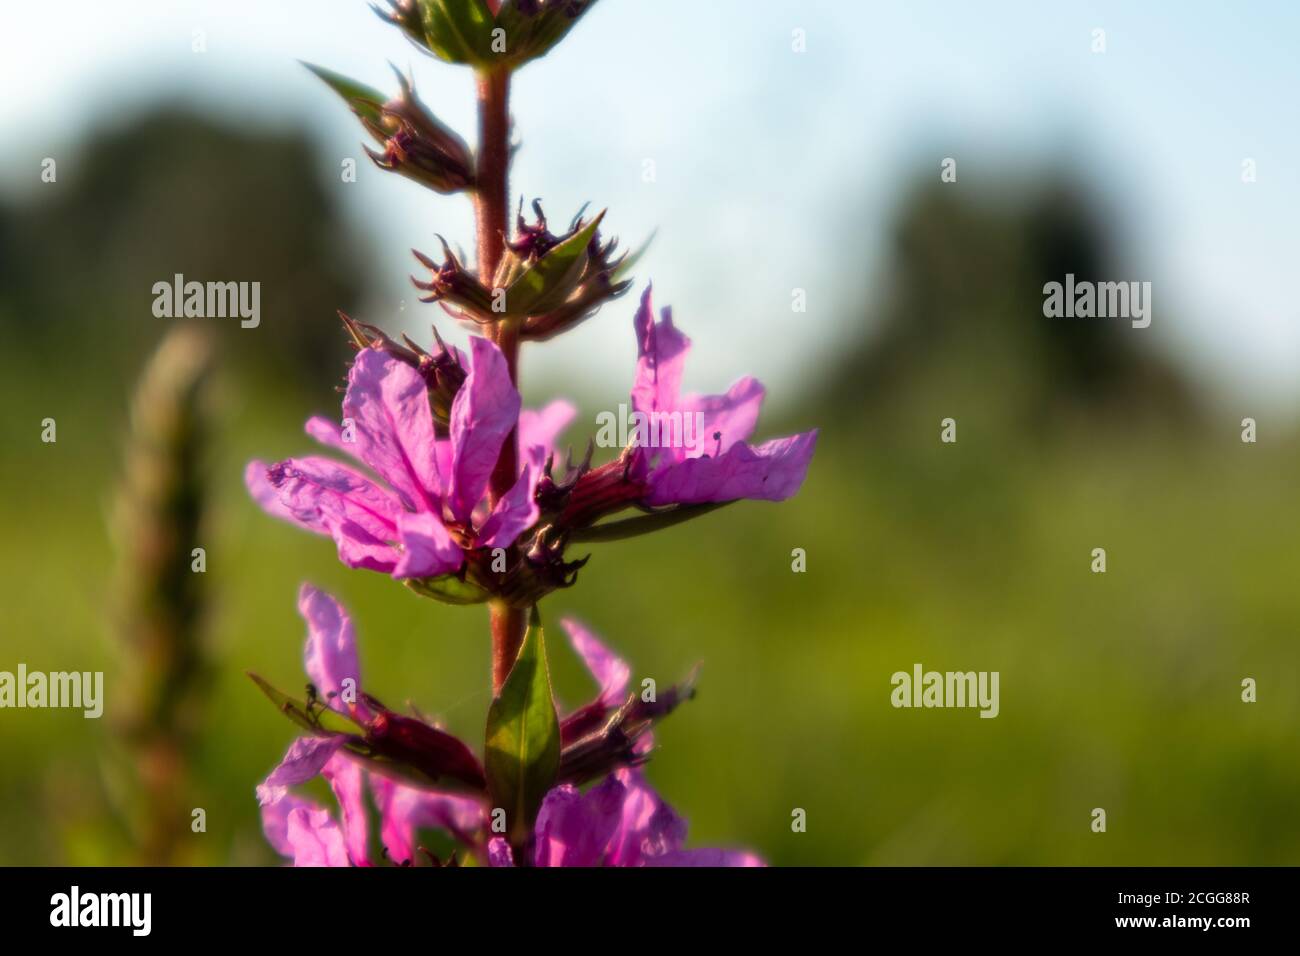 Lythrum salicaria, purple loosestrife, flowering plant close-up, Lythraceae family. Pink wild flowers in warm light on green summer grass lawn with bl Stock Photo